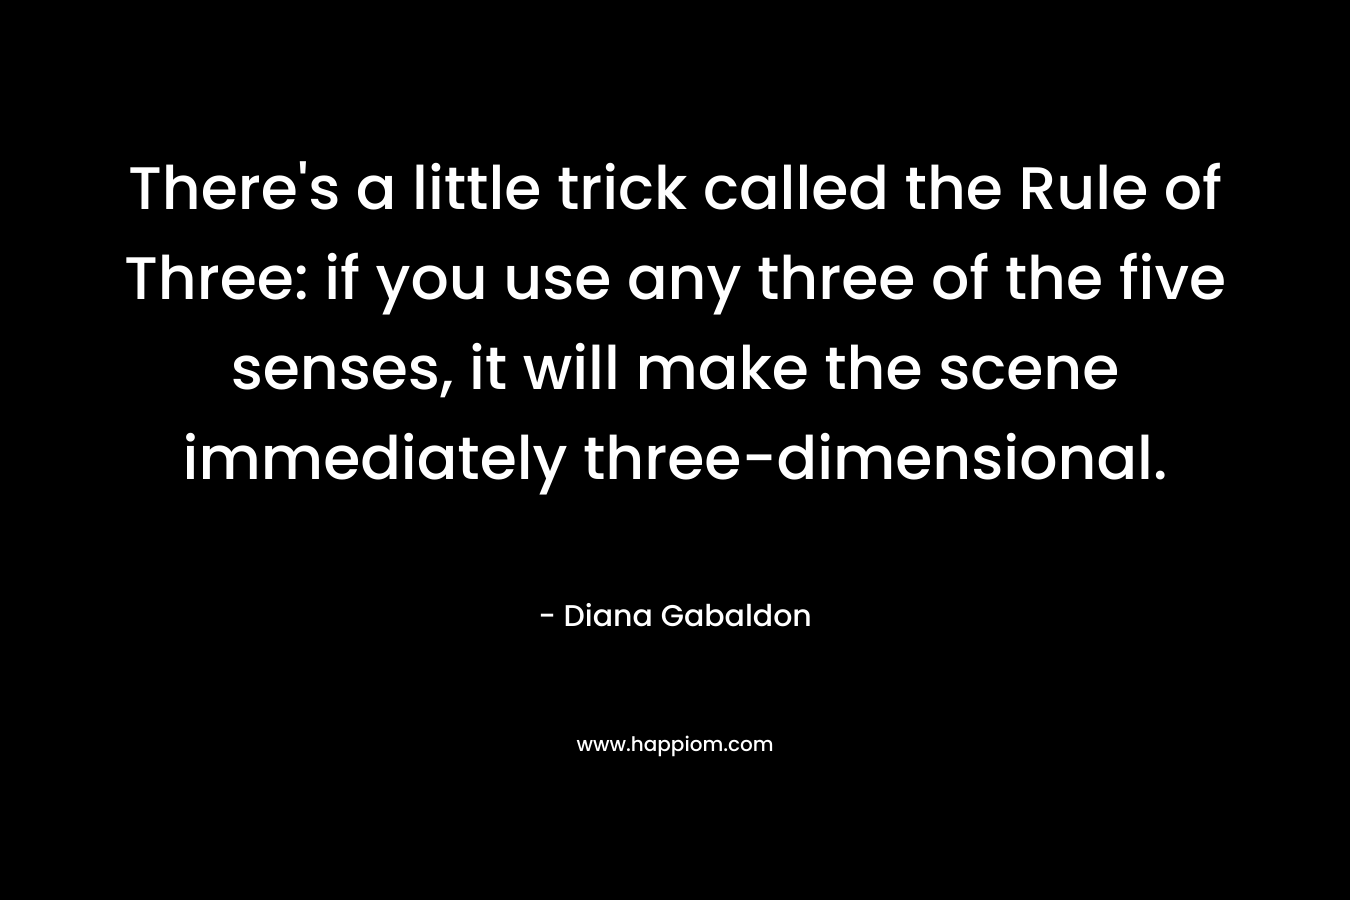 There's a little trick called the Rule of Three: if you use any three of the five senses, it will make the scene immediately three-dimensional.